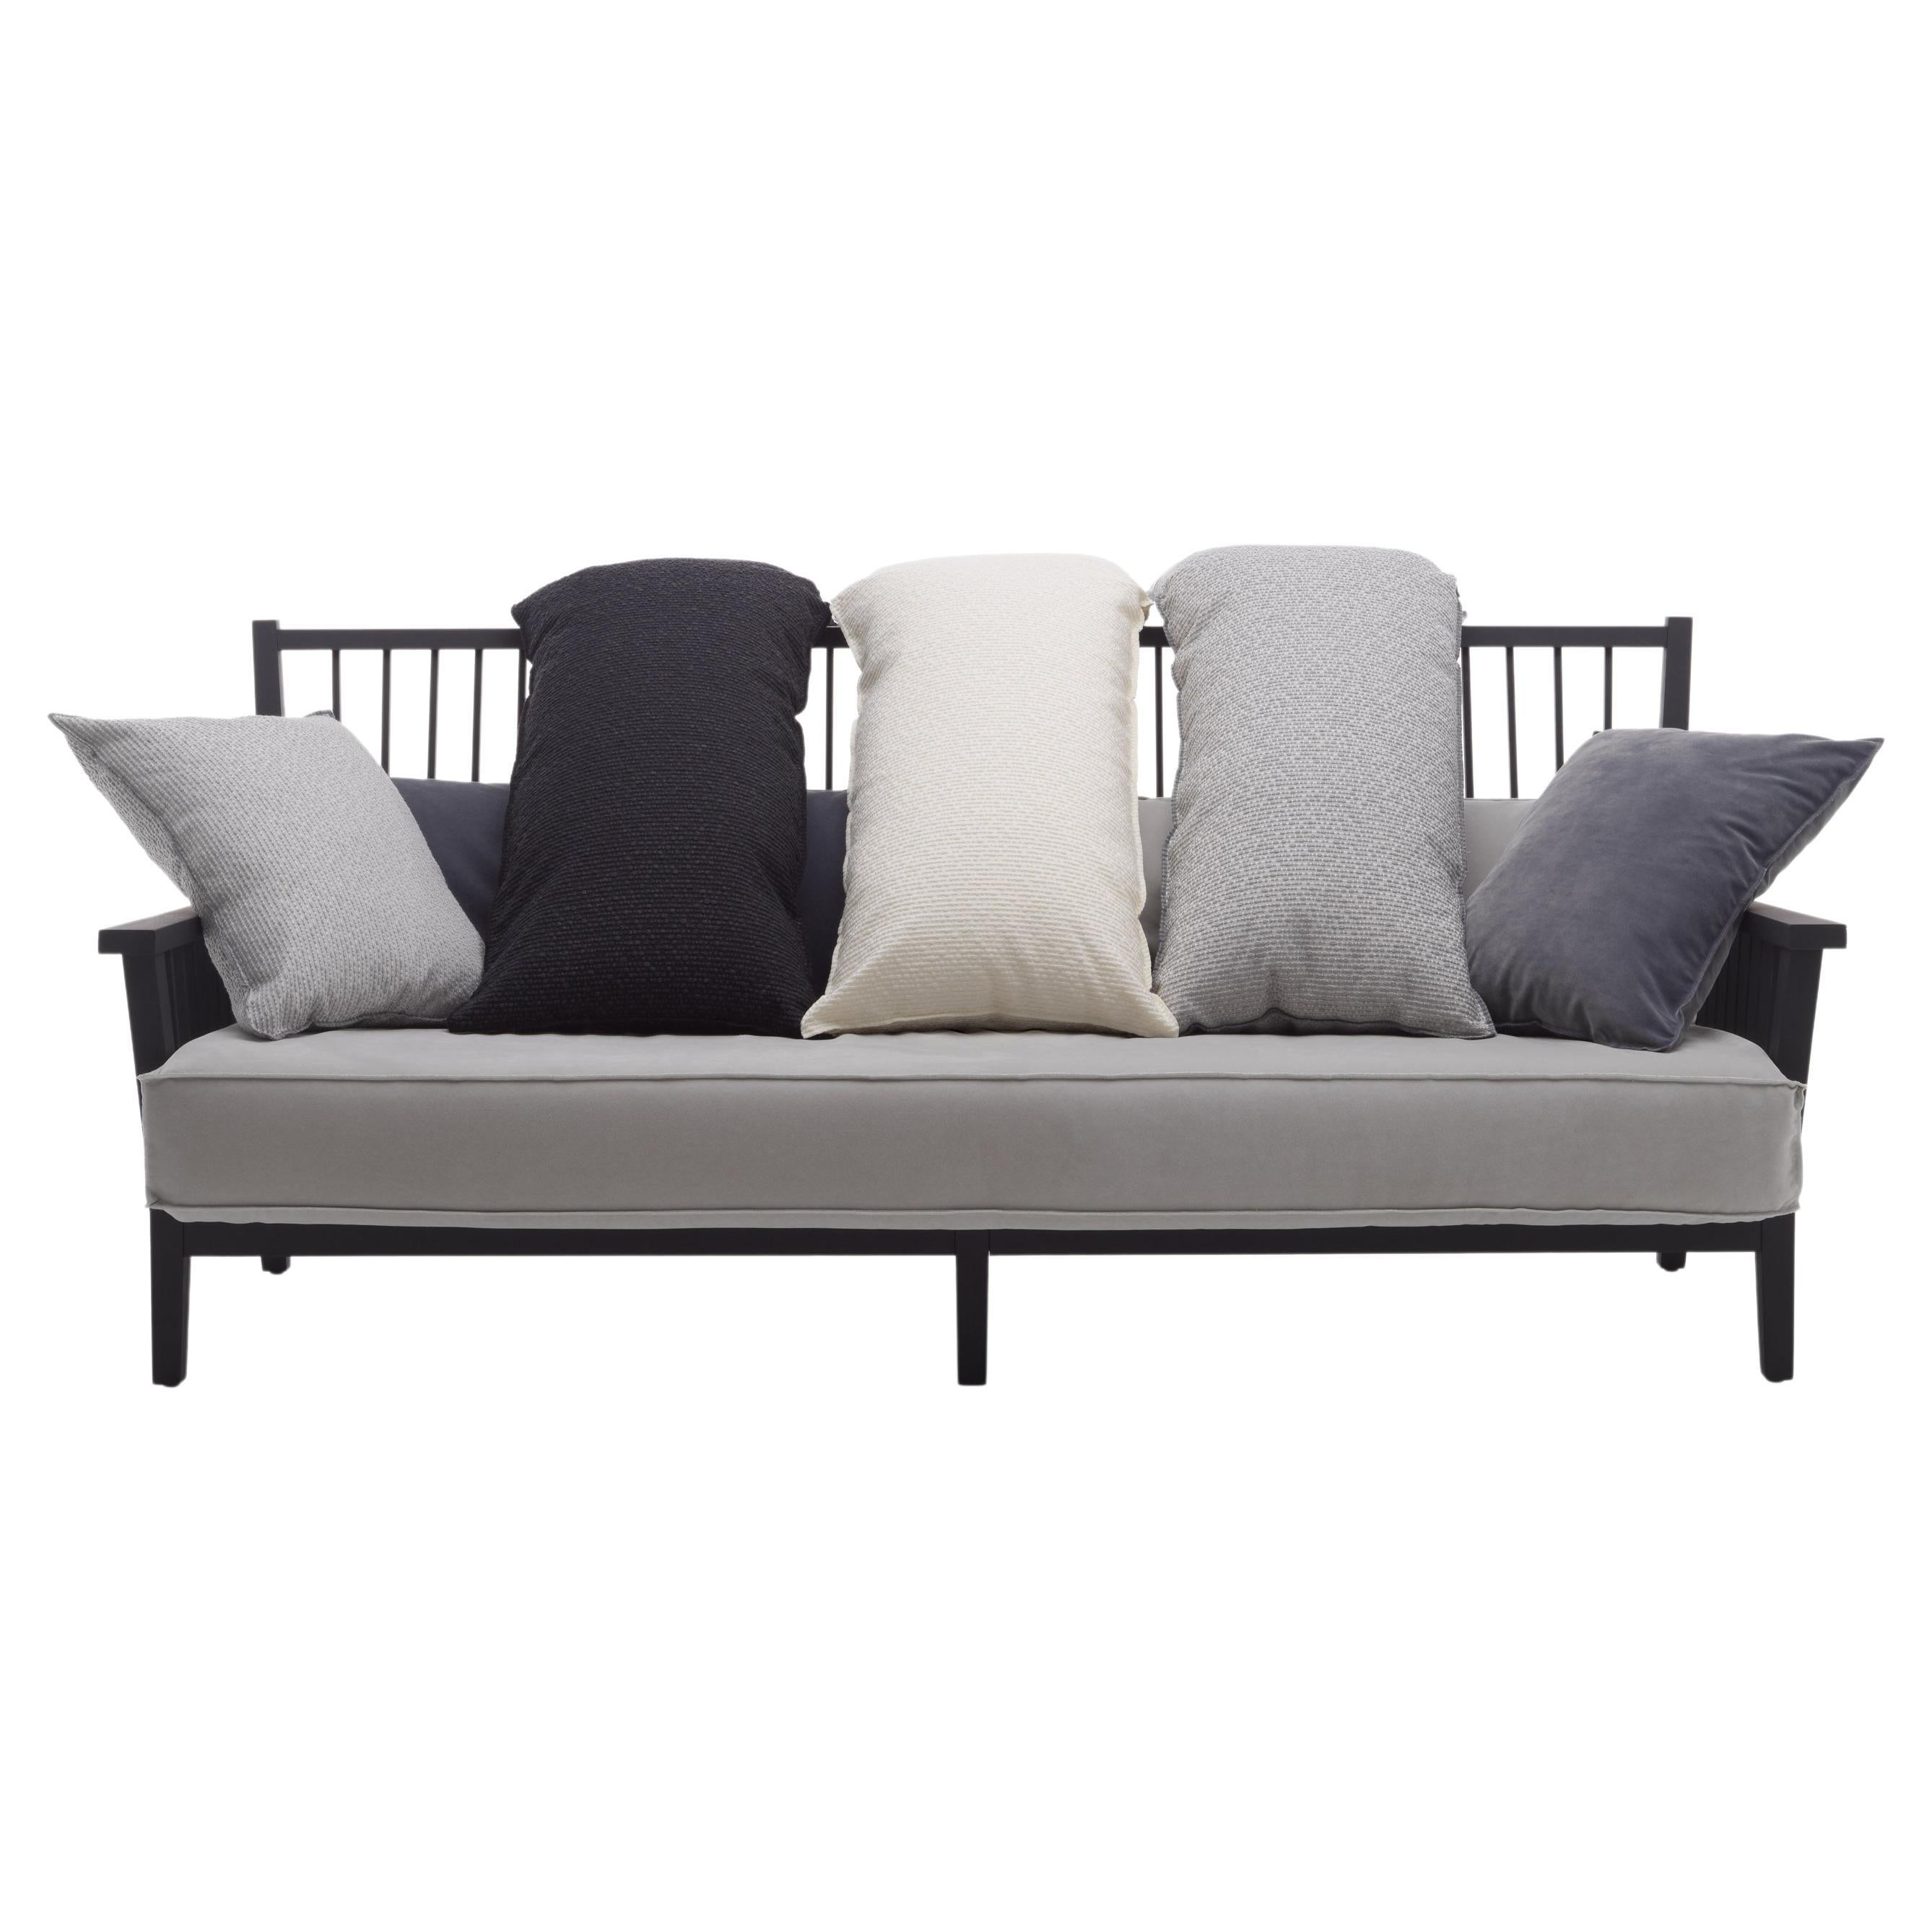 Gervasoni Gray 03 Sofa in Black Lacquered Oak & Fog Upholstery by Paola Navone